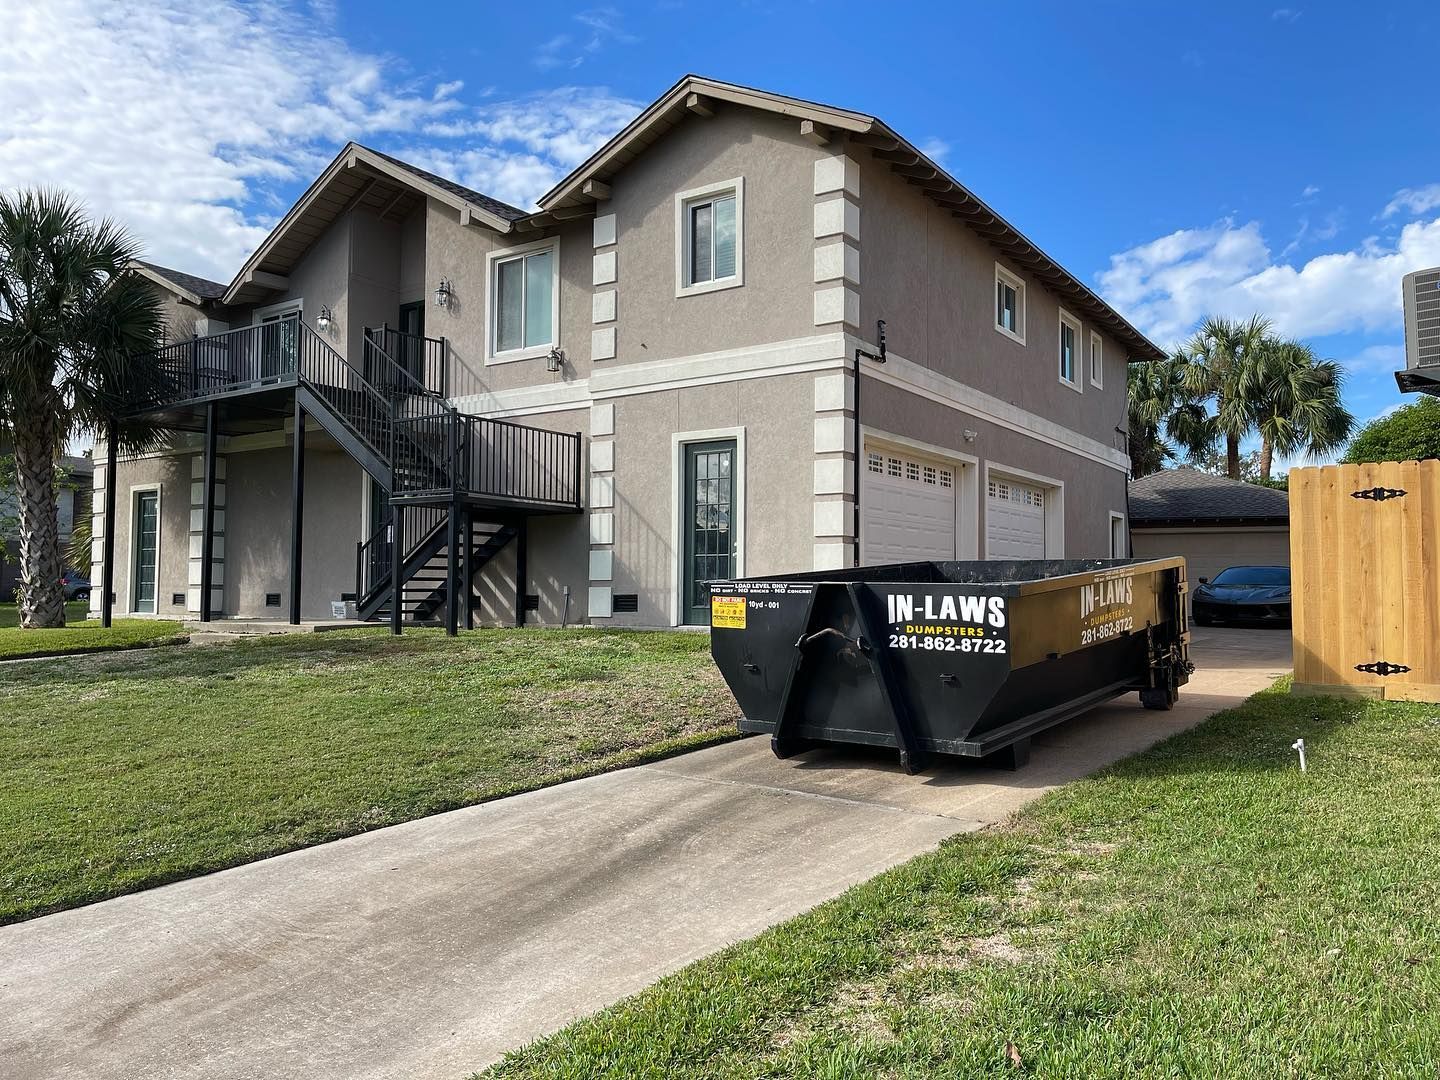 10 yard dumpster in driveway of house in Nassau Bay, Texas